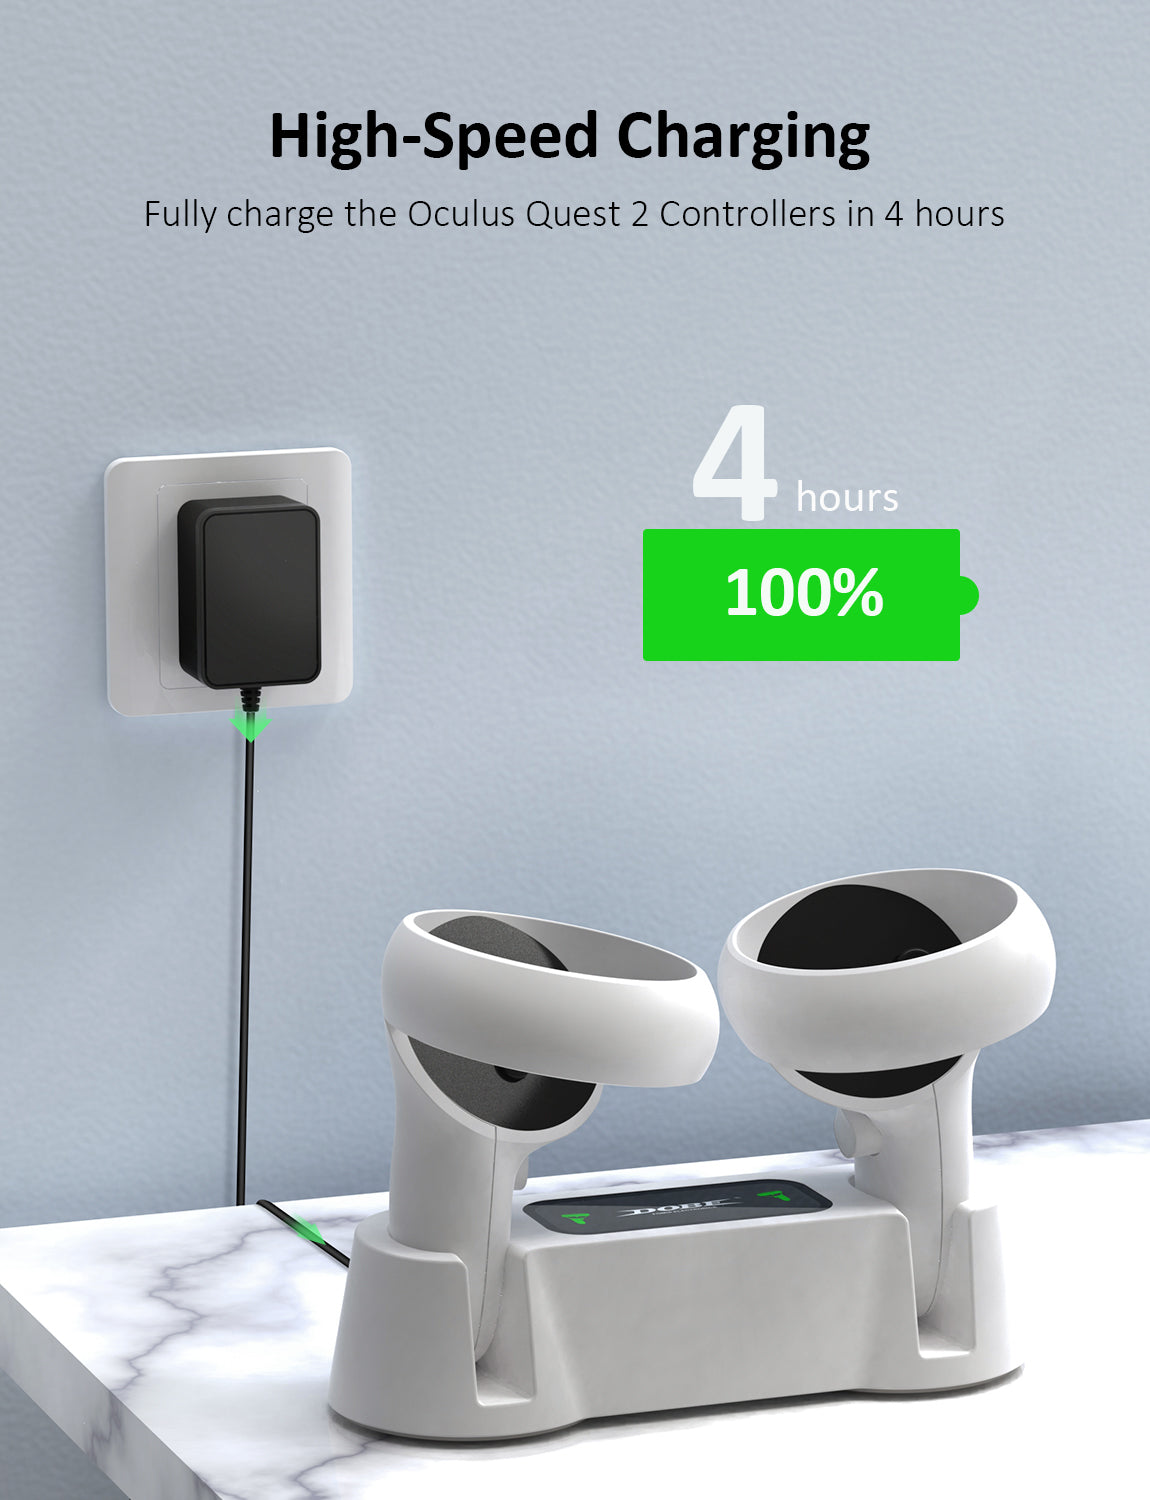 The charging dock fully charges Oculus Quest 2 Controllers in 4 hours with the power adapter.